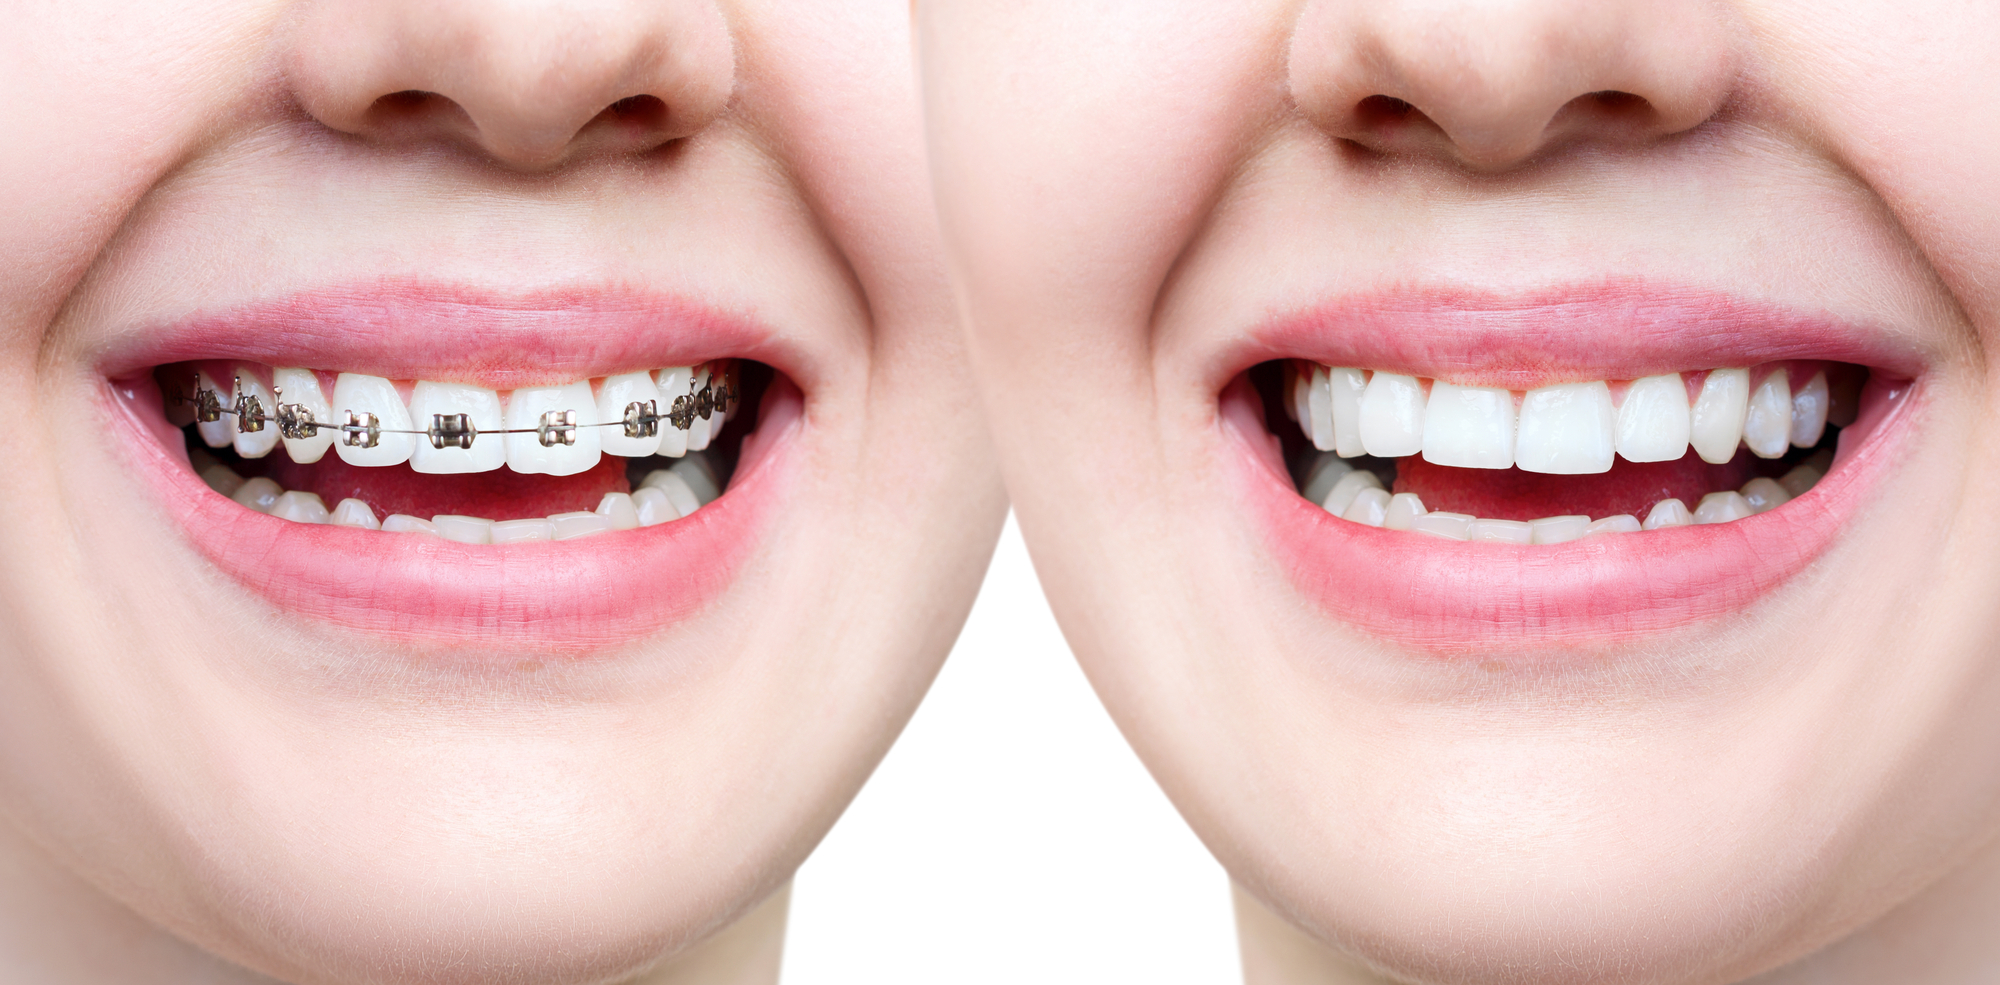 How To Choose Between Traditional Dental Braces Or Invisalign® 23 Smiles